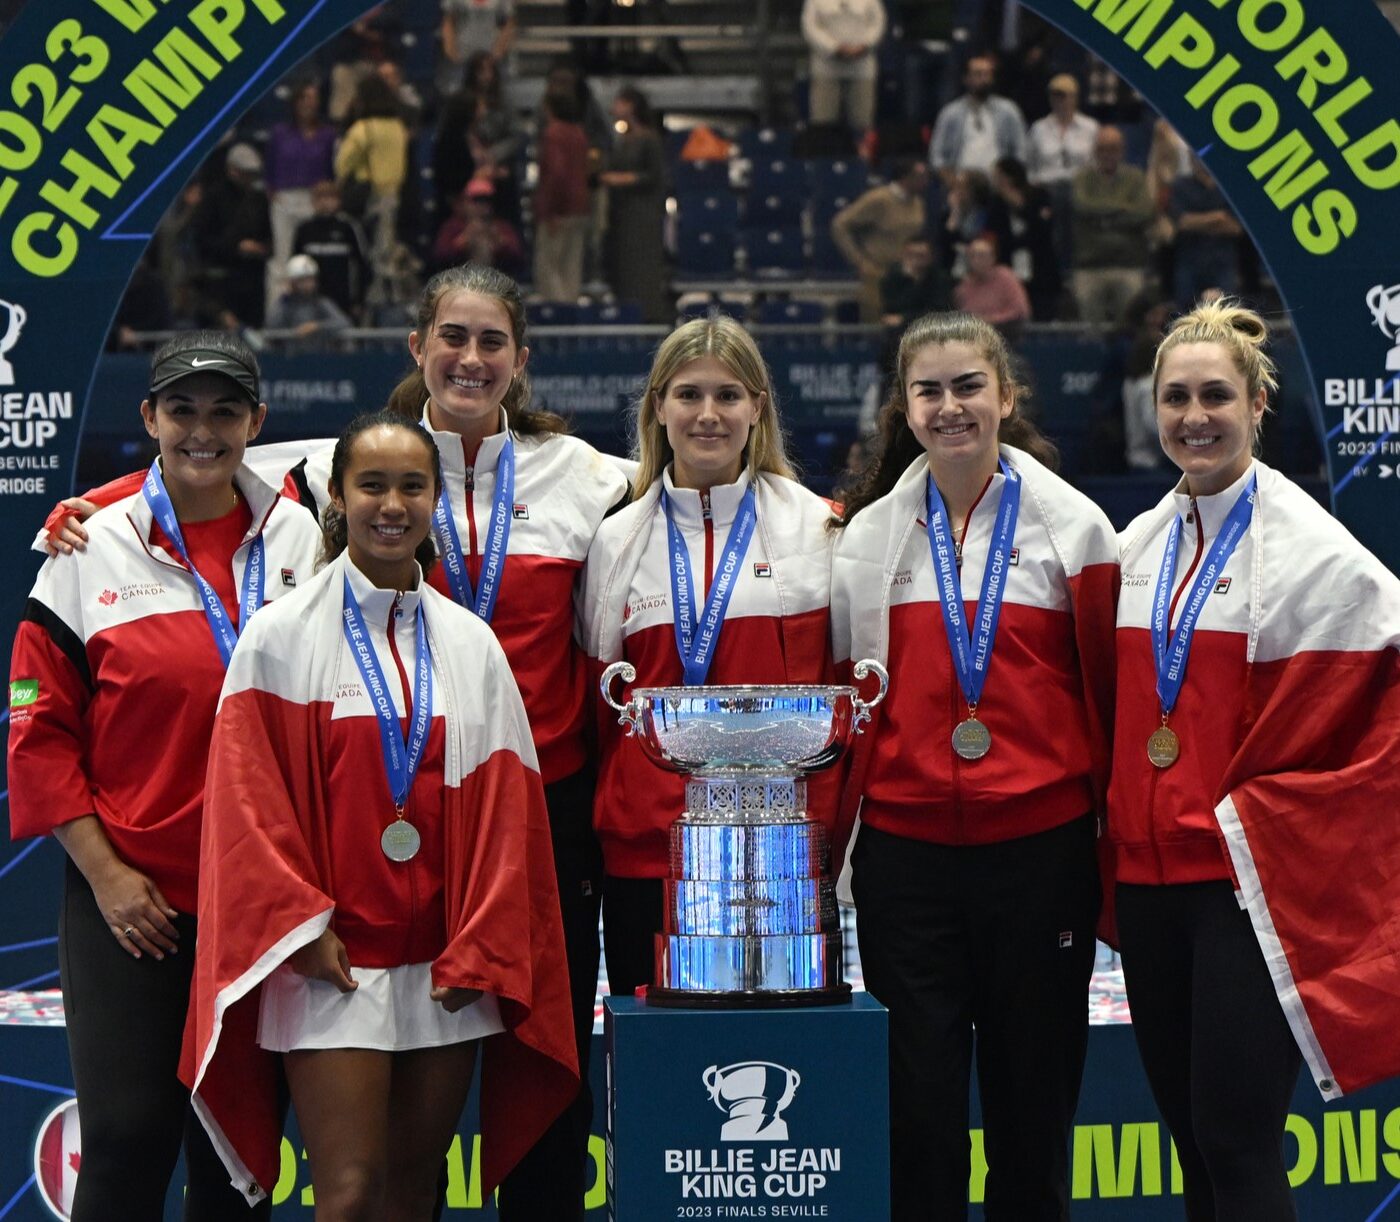 From left to right, Heidi El Tabakh, Leylah Fernandez, Rebecca Marino, Eugenie Bouchard, Marina Stakusic, and Gabriela Dabrowski wear their medals and stand behind the Billie Jean King Cup trophy.